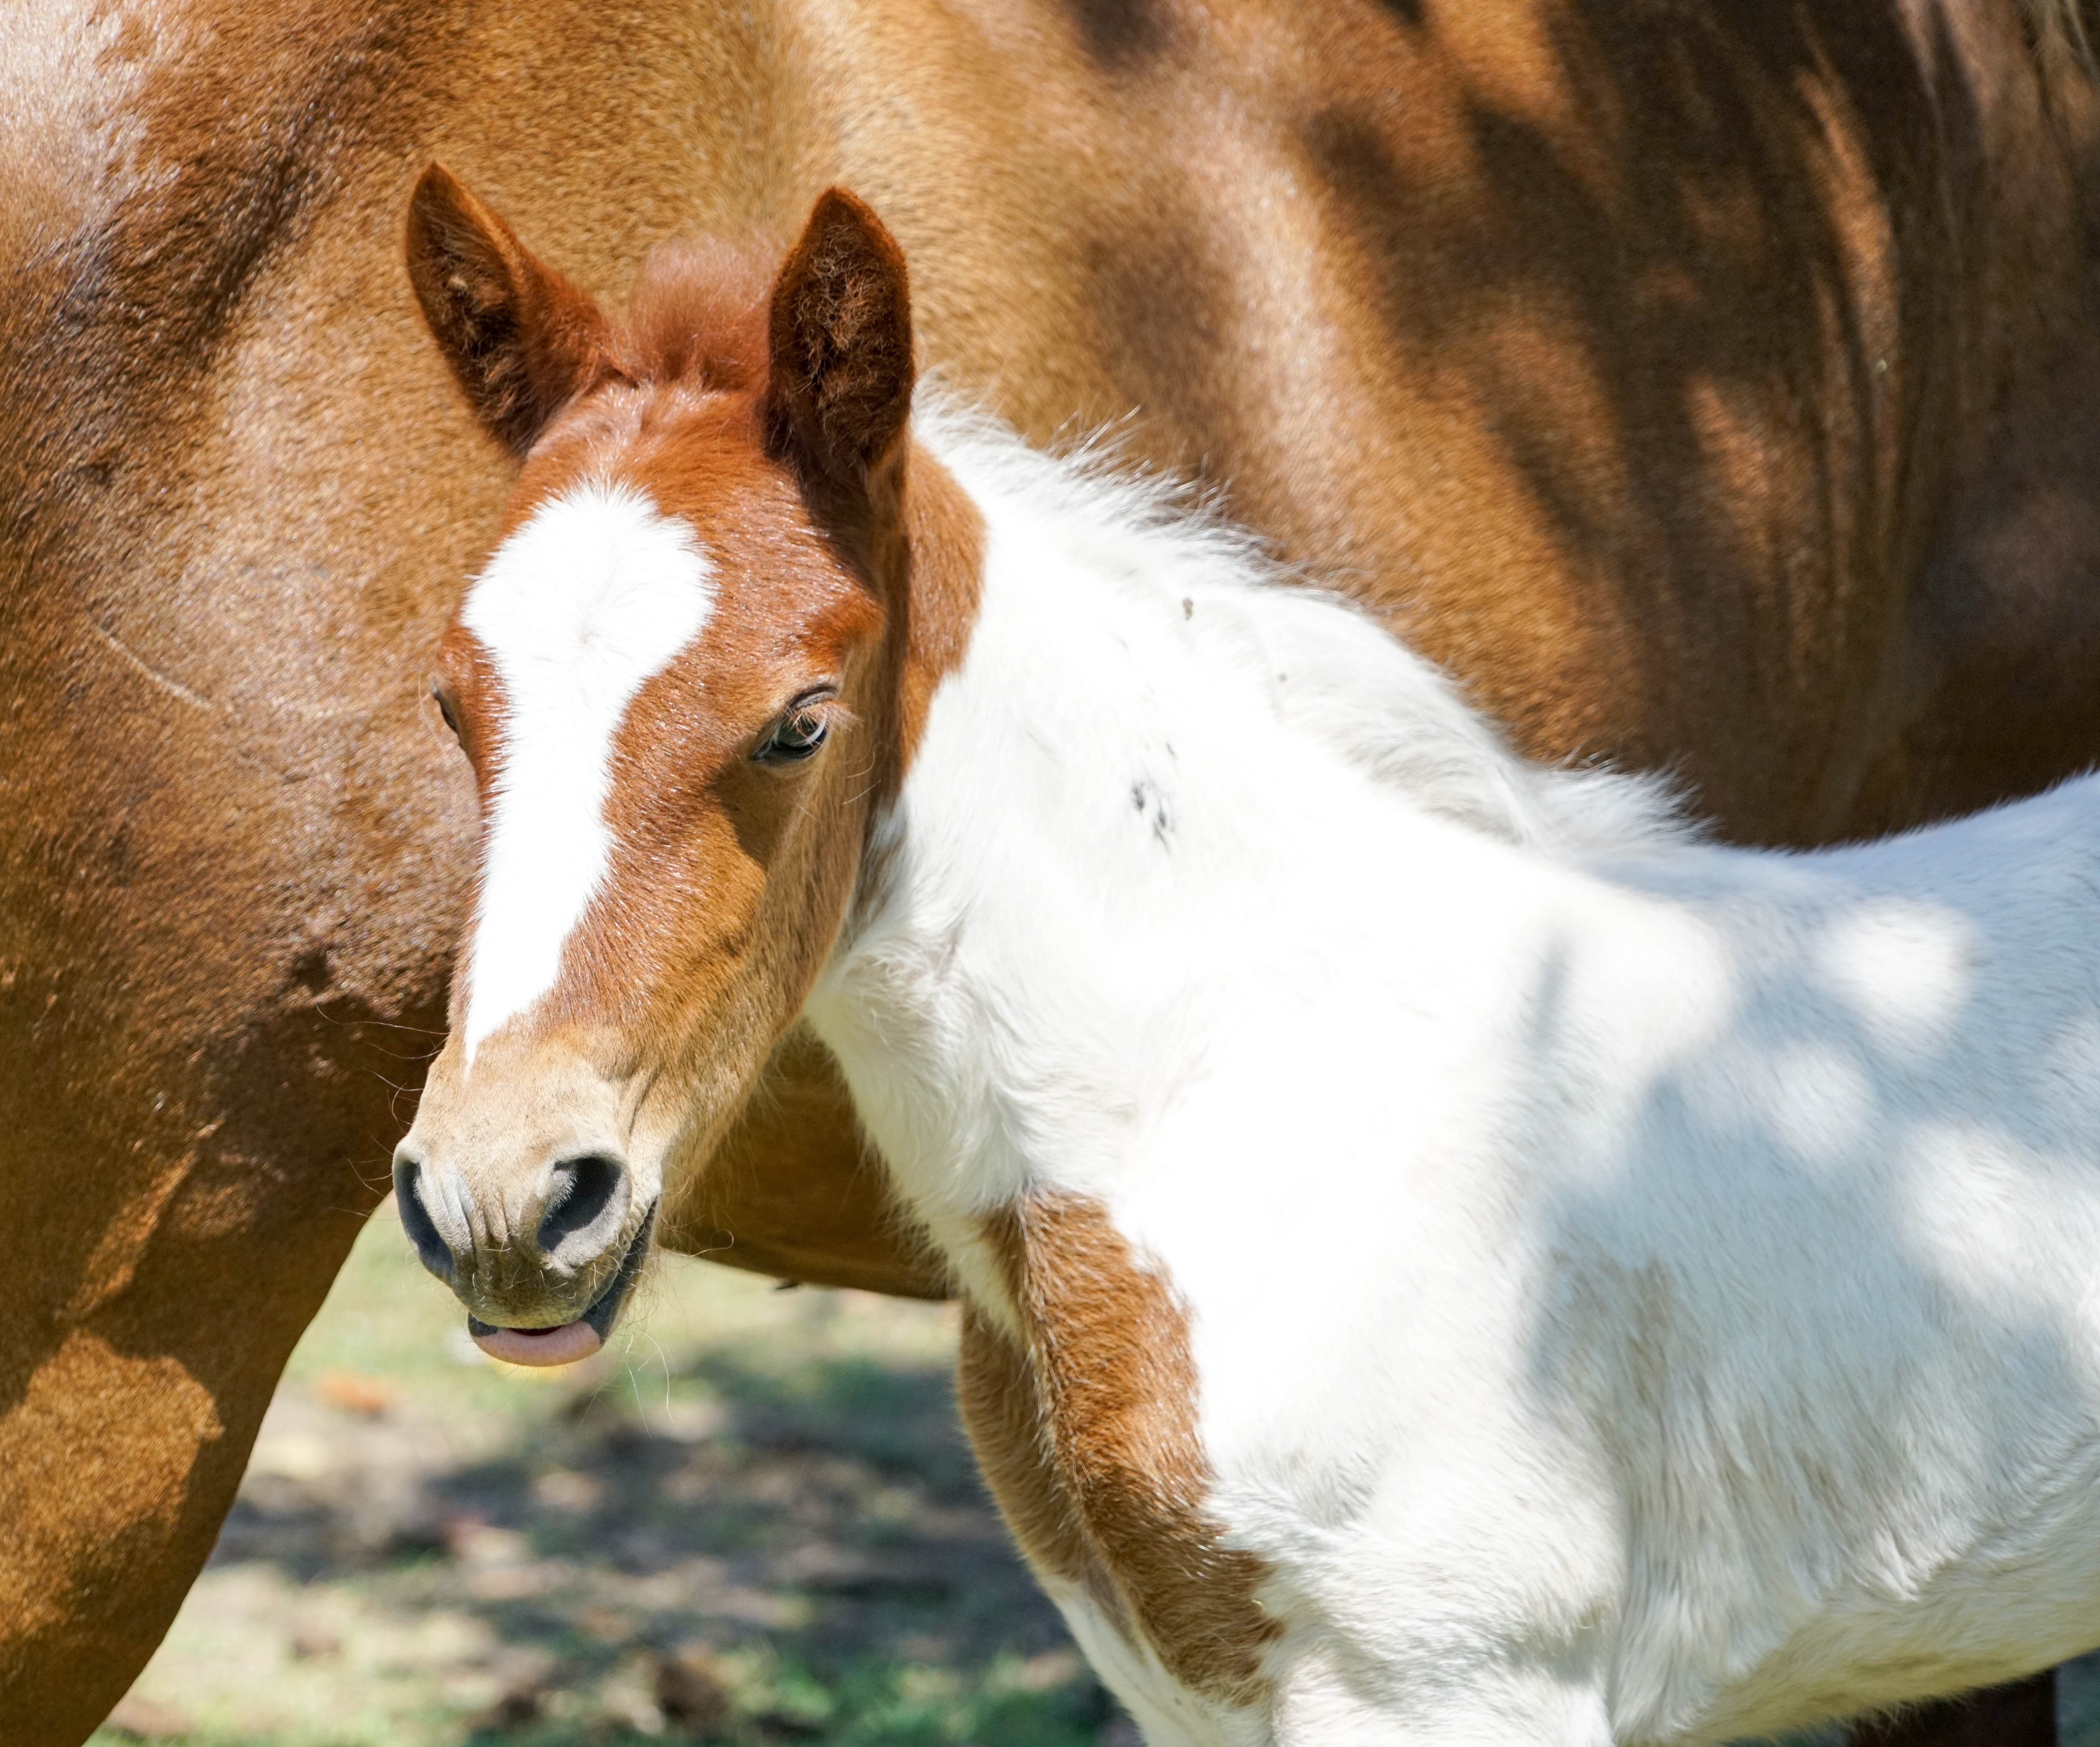 Brown, Face, Foal, Horse, White, Baby, domestic animals, one animal